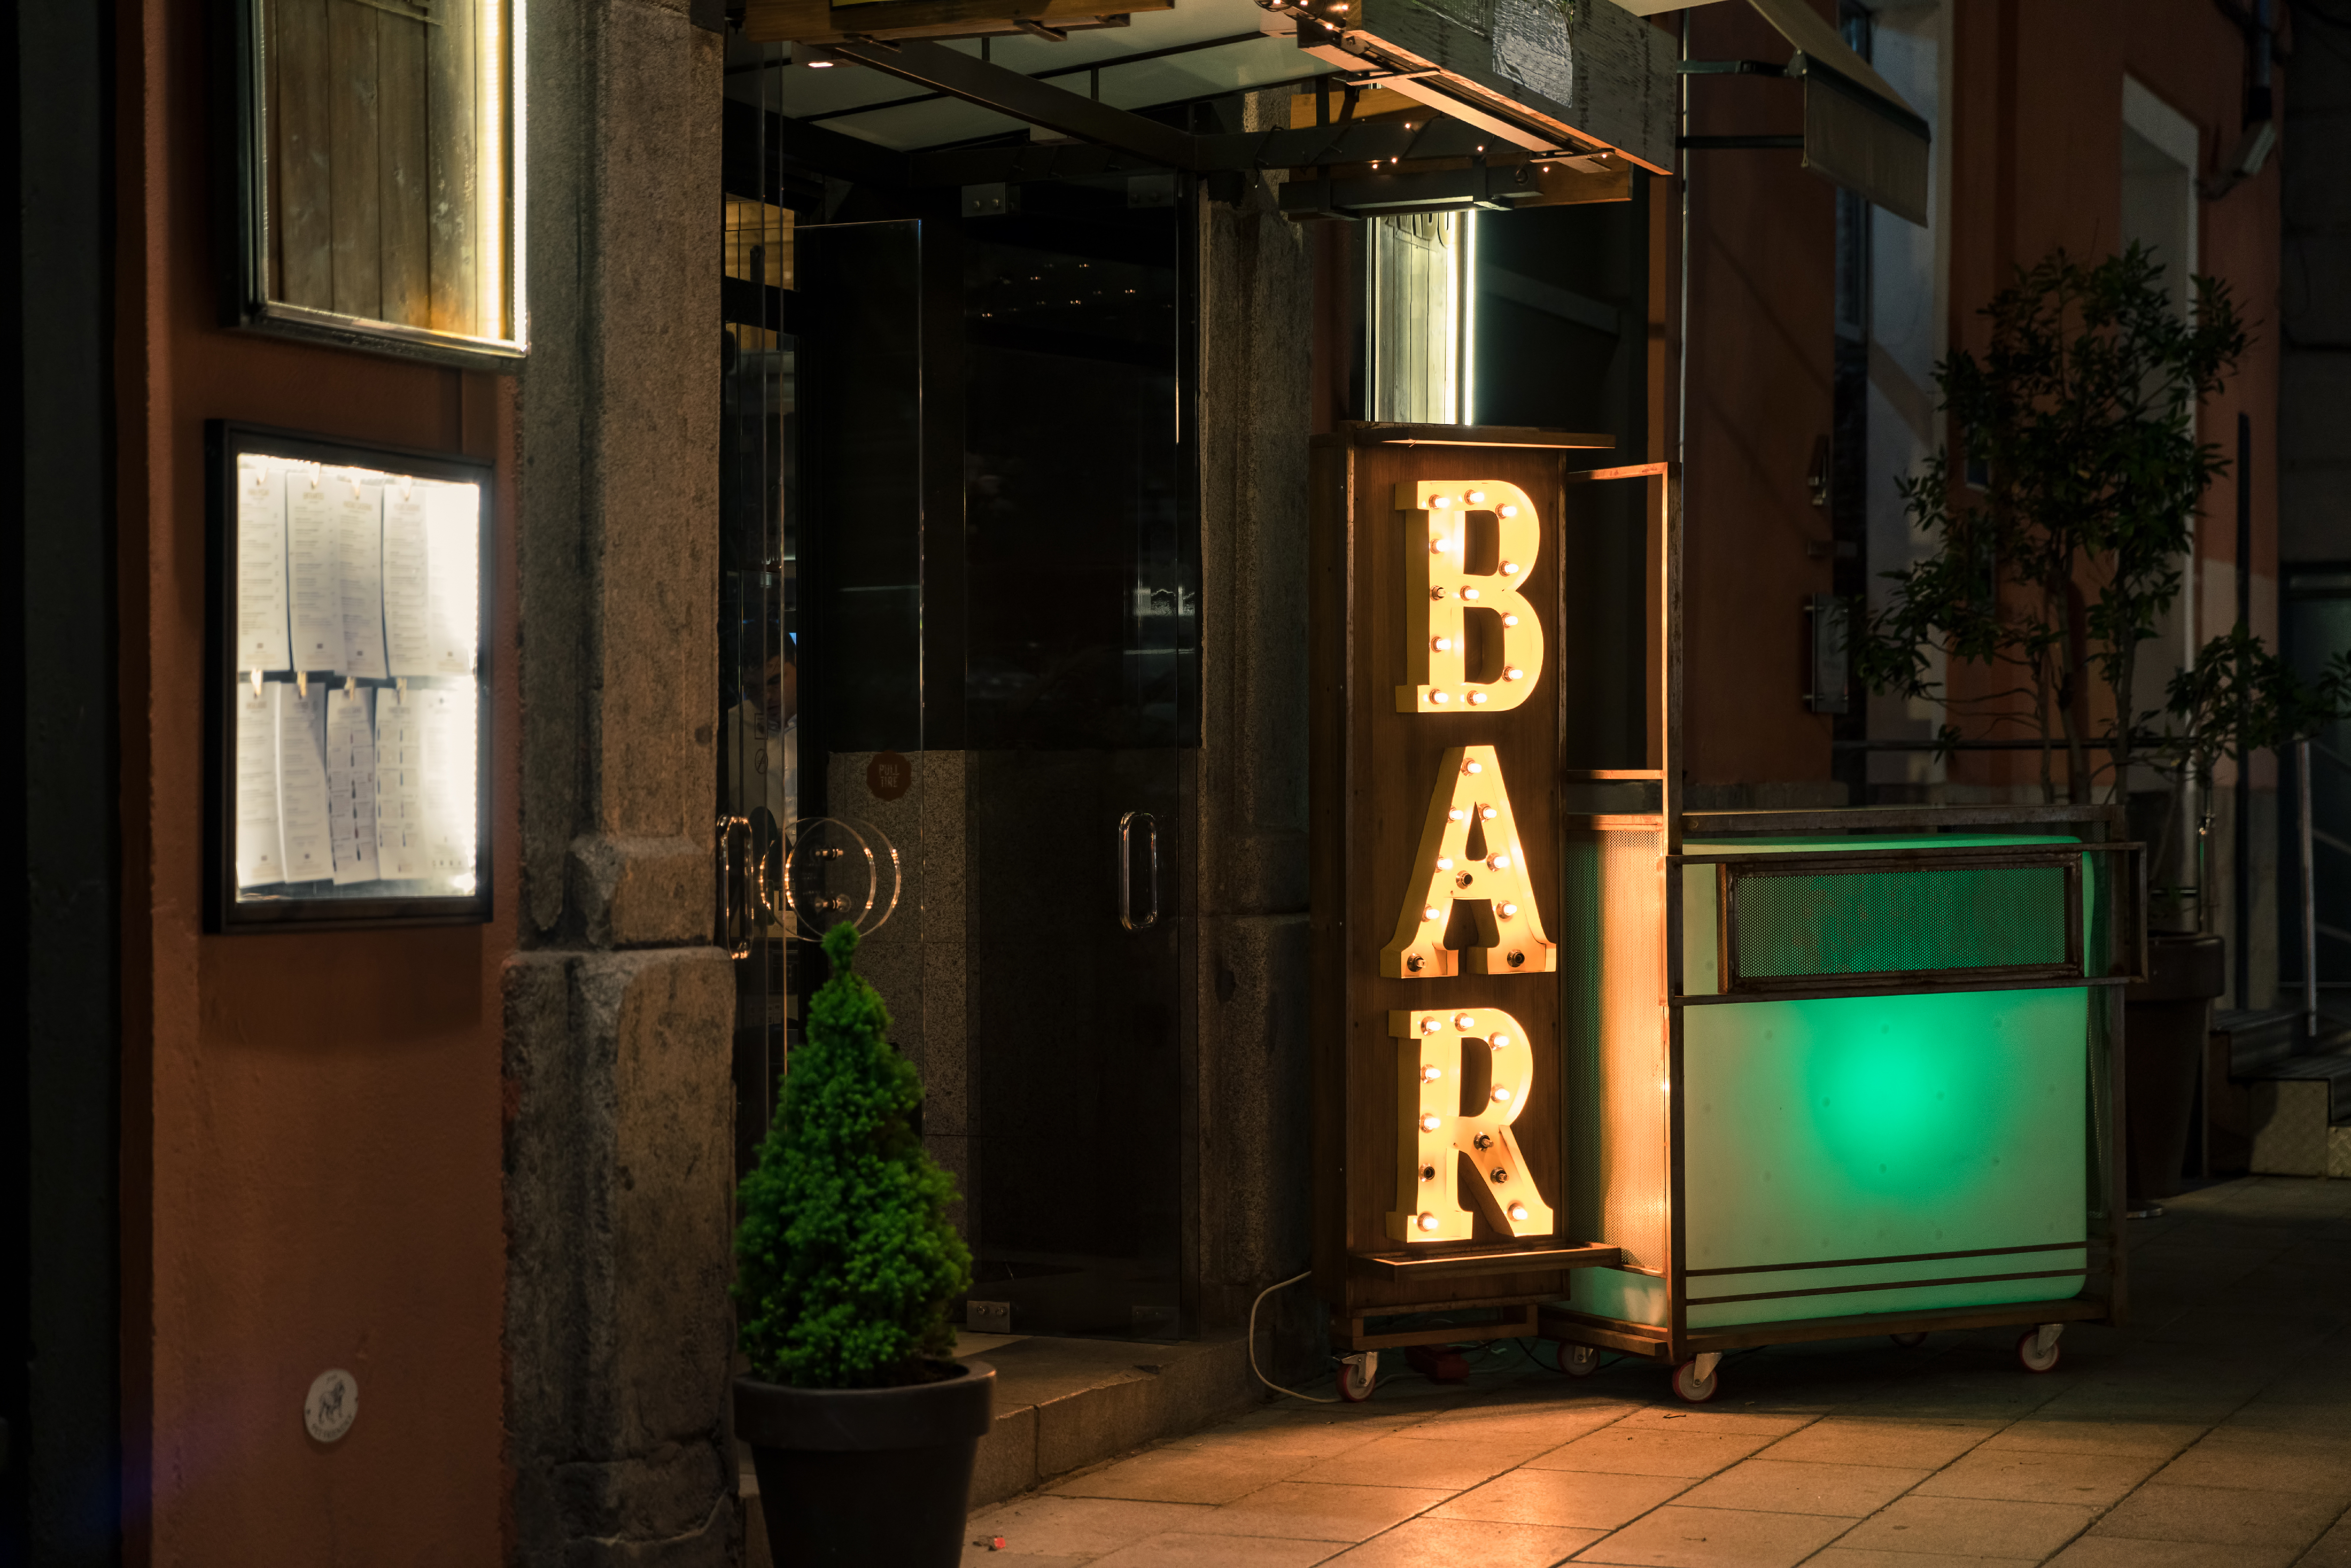 Bar Electric Light Sign From Outside. | Source: Shutterstock